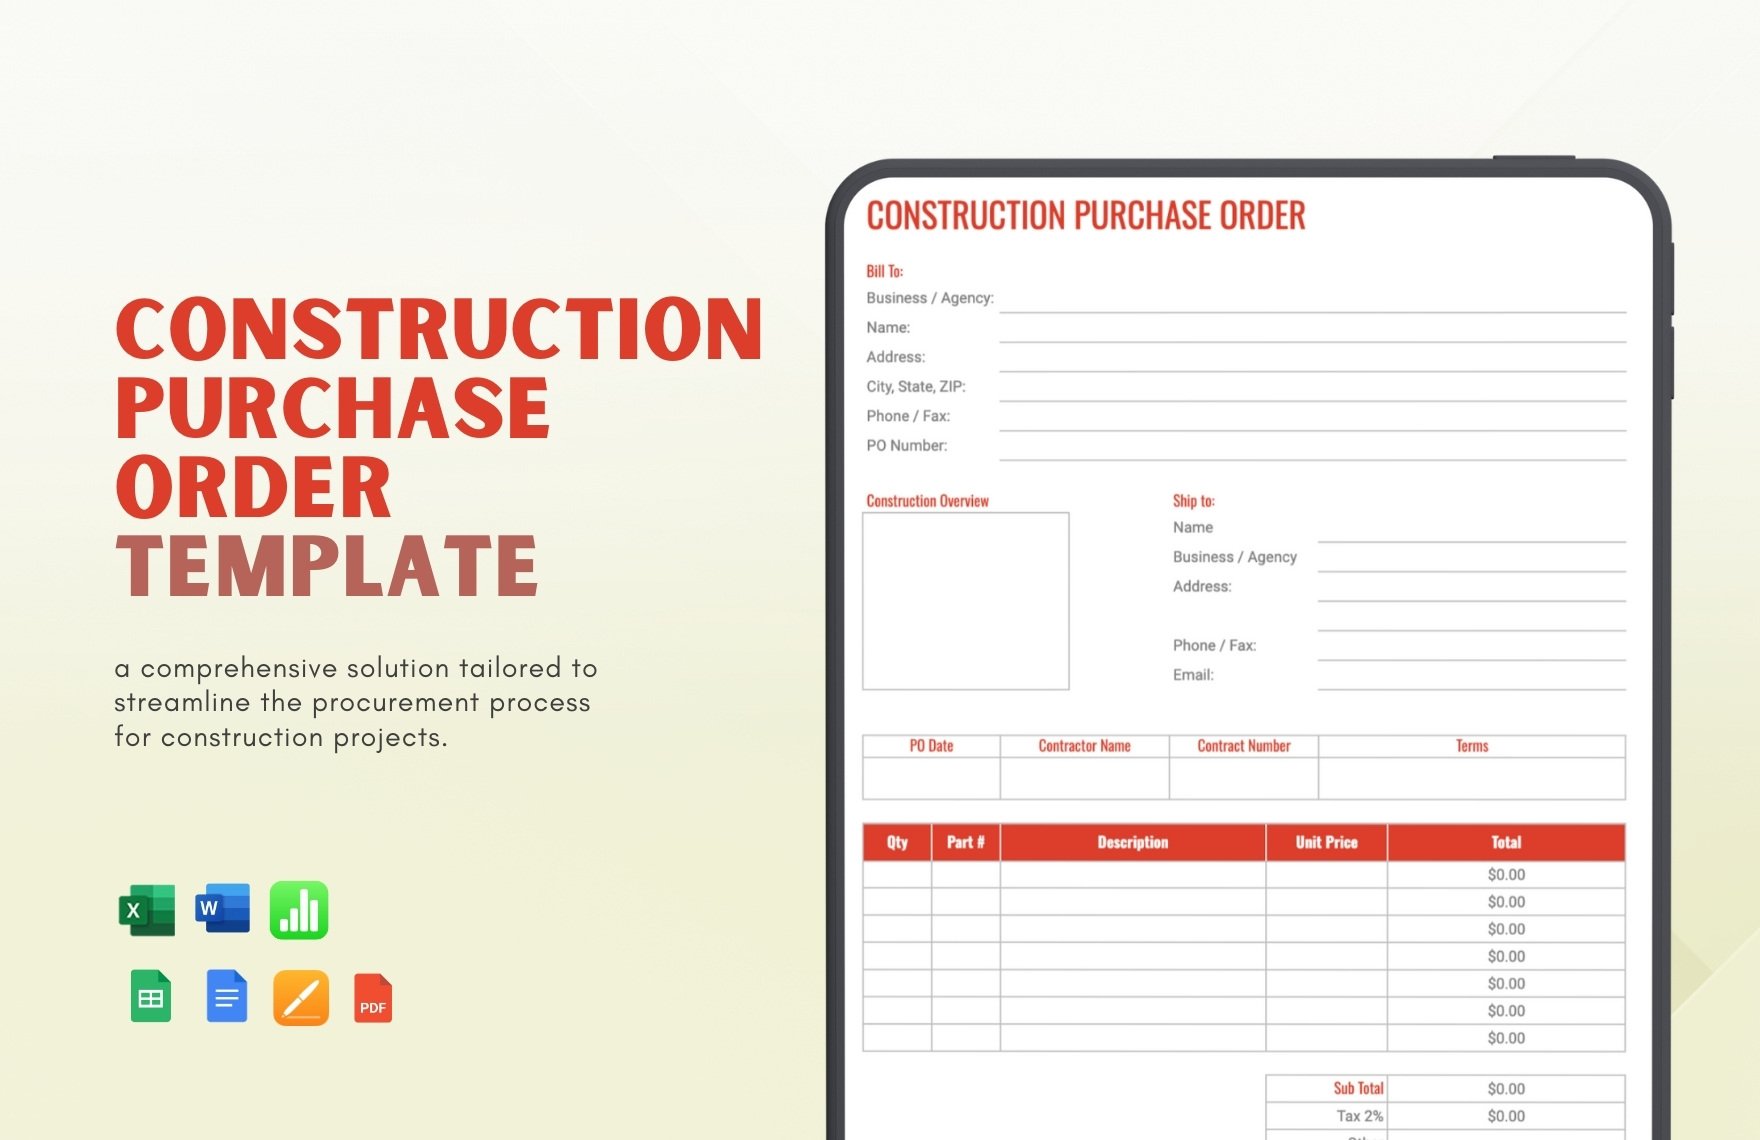 Construction Purchase Order Template in Word, Google Docs, Excel, PDF, Google Sheets, Apple Pages, Apple Numbers